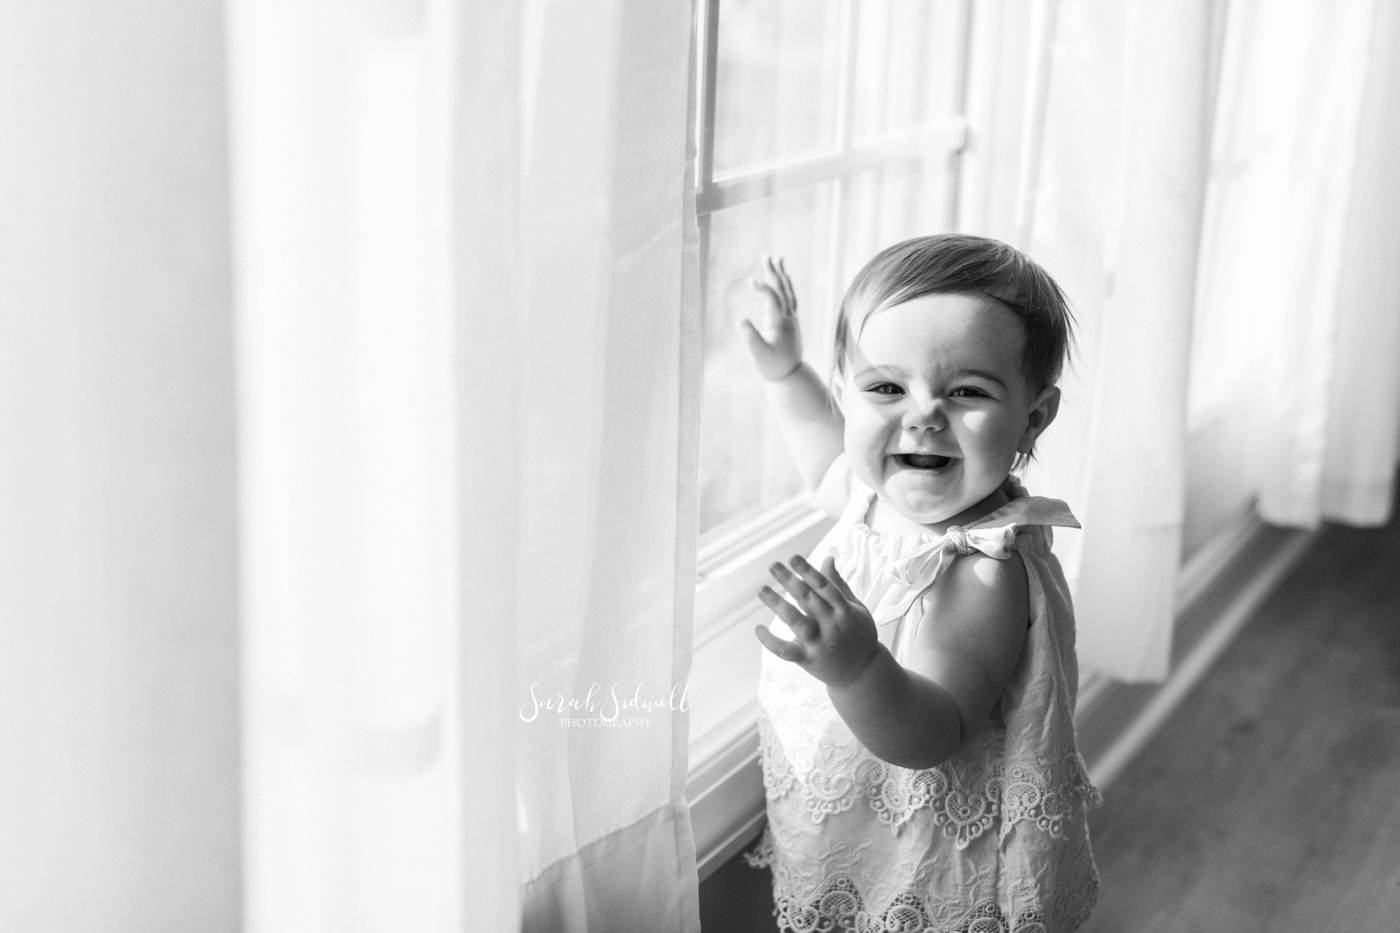 A baby girl touches a window